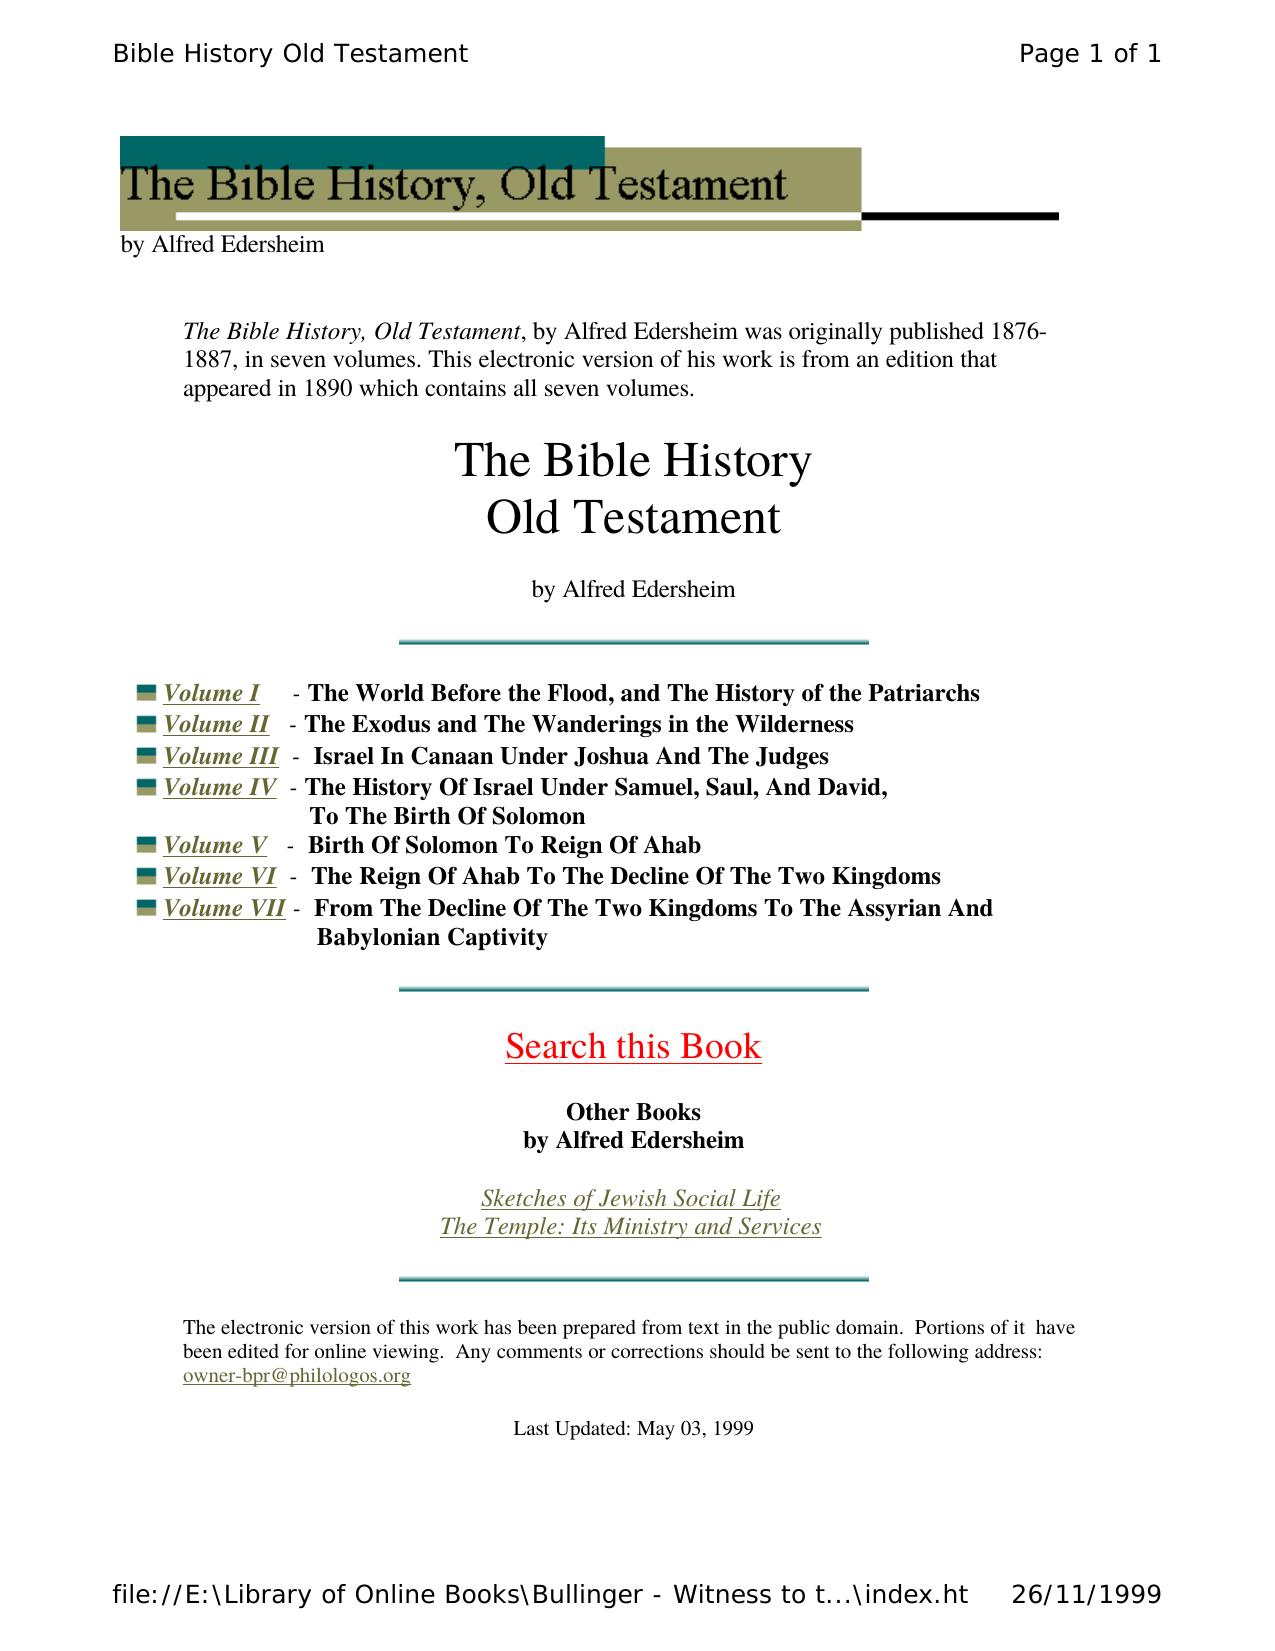 Old Testament Bible History by Alfred Edersheim